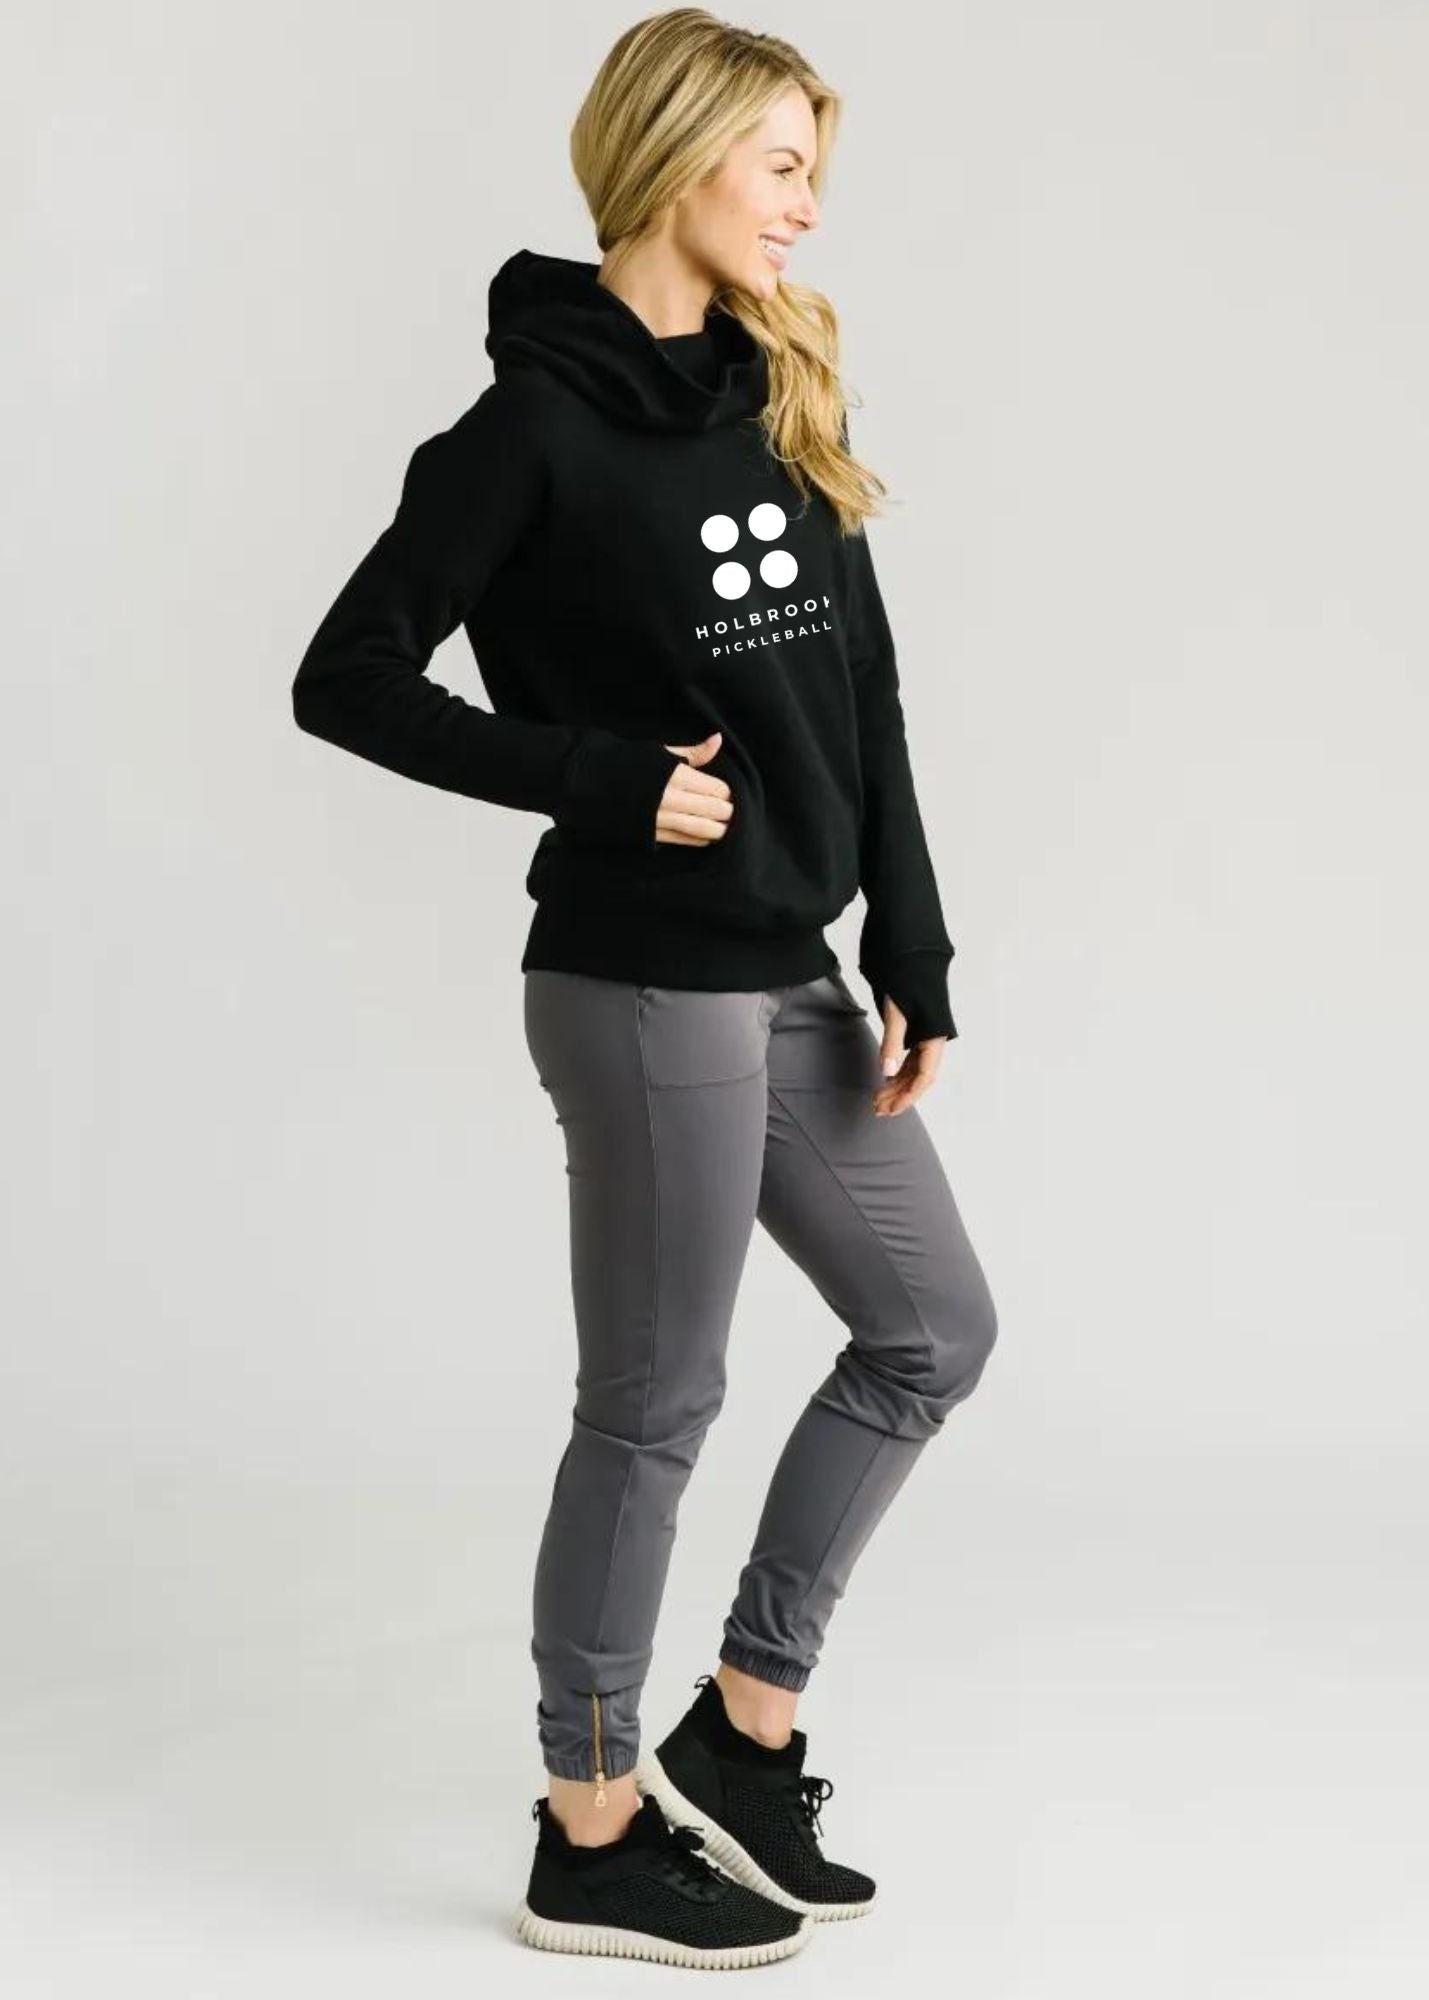 Women's Recovery Hoodie - Holbrook Pickleball